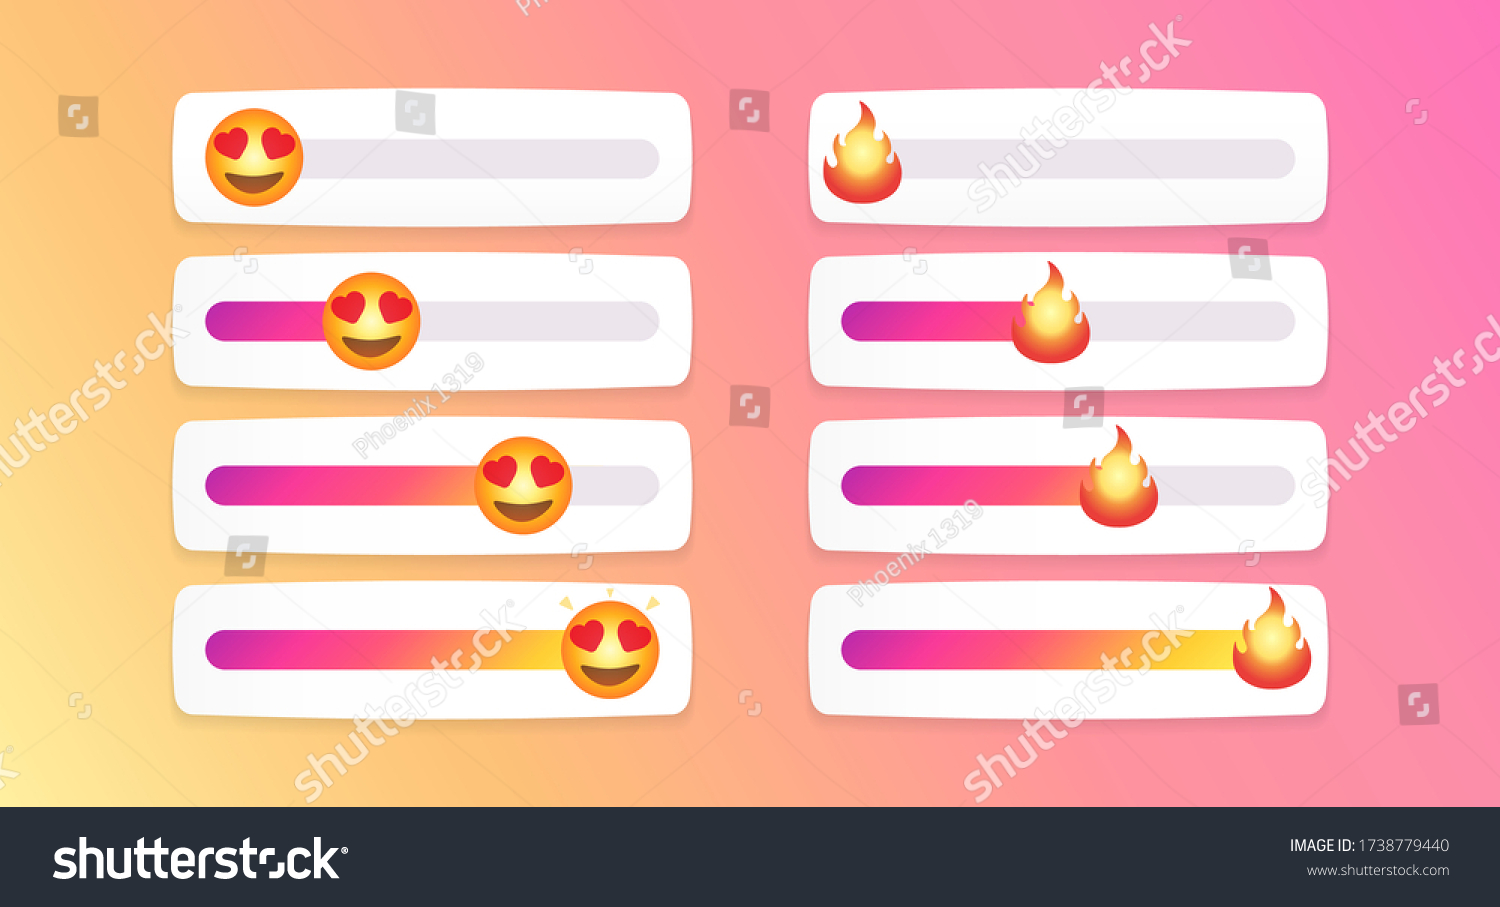 SVG of A set of color sliders with emoticons and flames on them, isolated on a color gradient. The layout of a web slider, emoticons, smile. The layout of the elements of the plot. Vector illustration svg